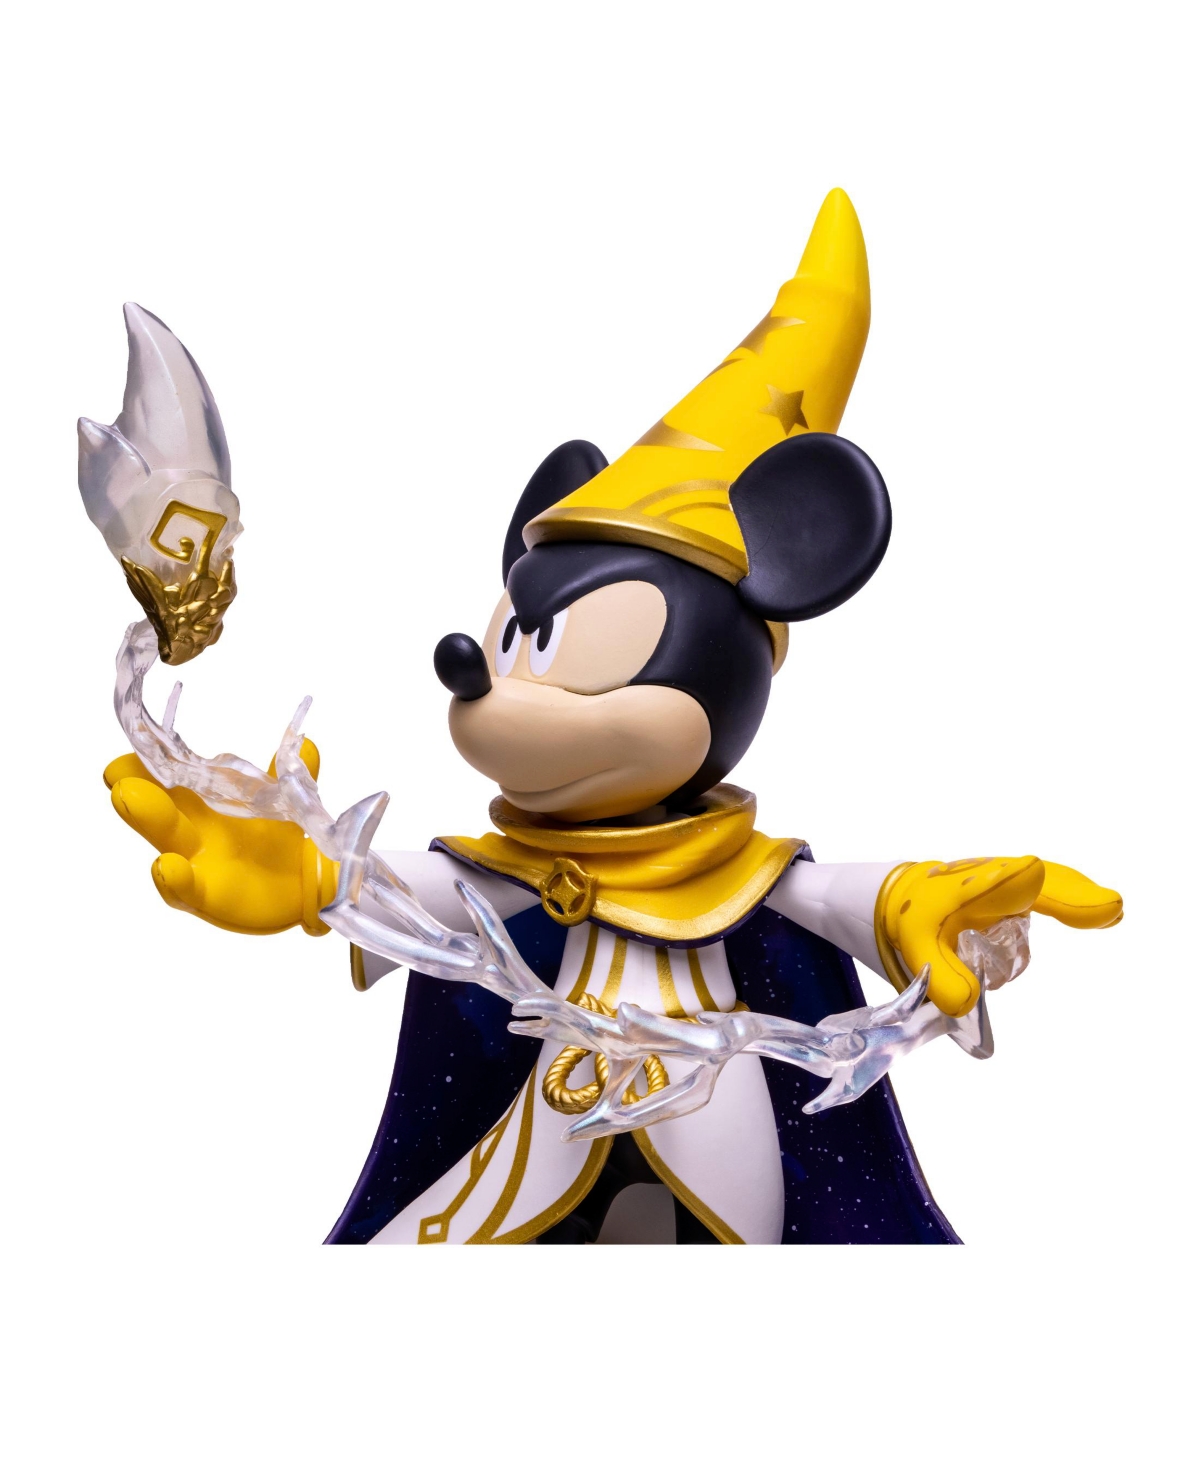 Disney Mirrorverse Kids' 12" Mickey Mouse Figure In No Color